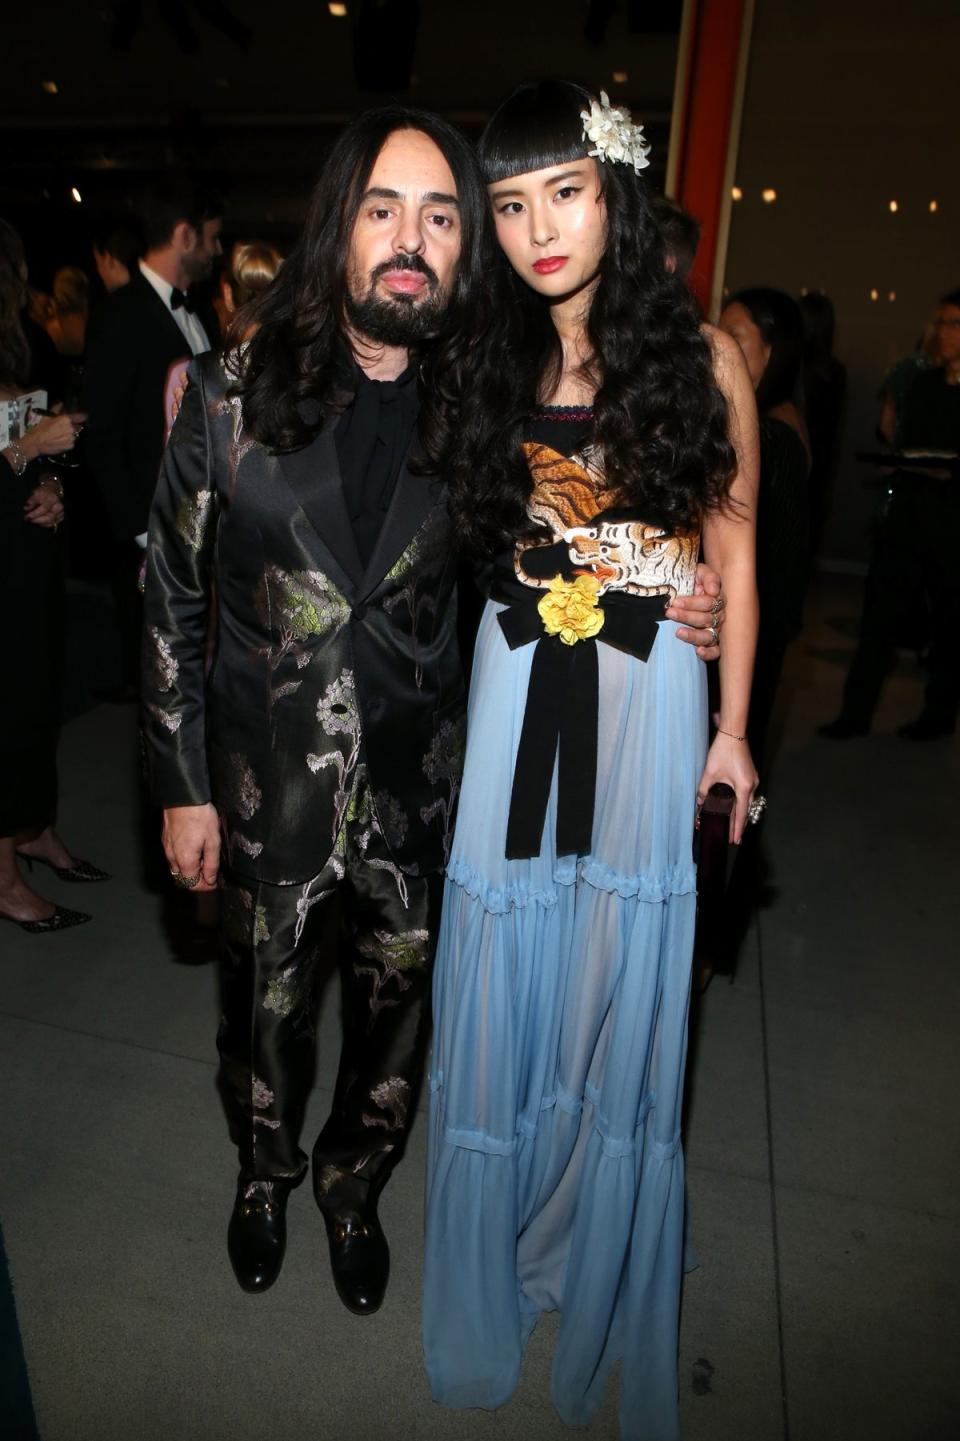 Creative Director of Gucci Alessandro Michele (L) and musician Asia Chow, wearing Gucci, attend LACMA 2015 Art+Film Gala Honoring James Turrell and Alejandro G IÃ±Ã¡rritu, Presented by Gucci at LACMA on November 7, 2015 in Los Angeles, California (Getty Images )